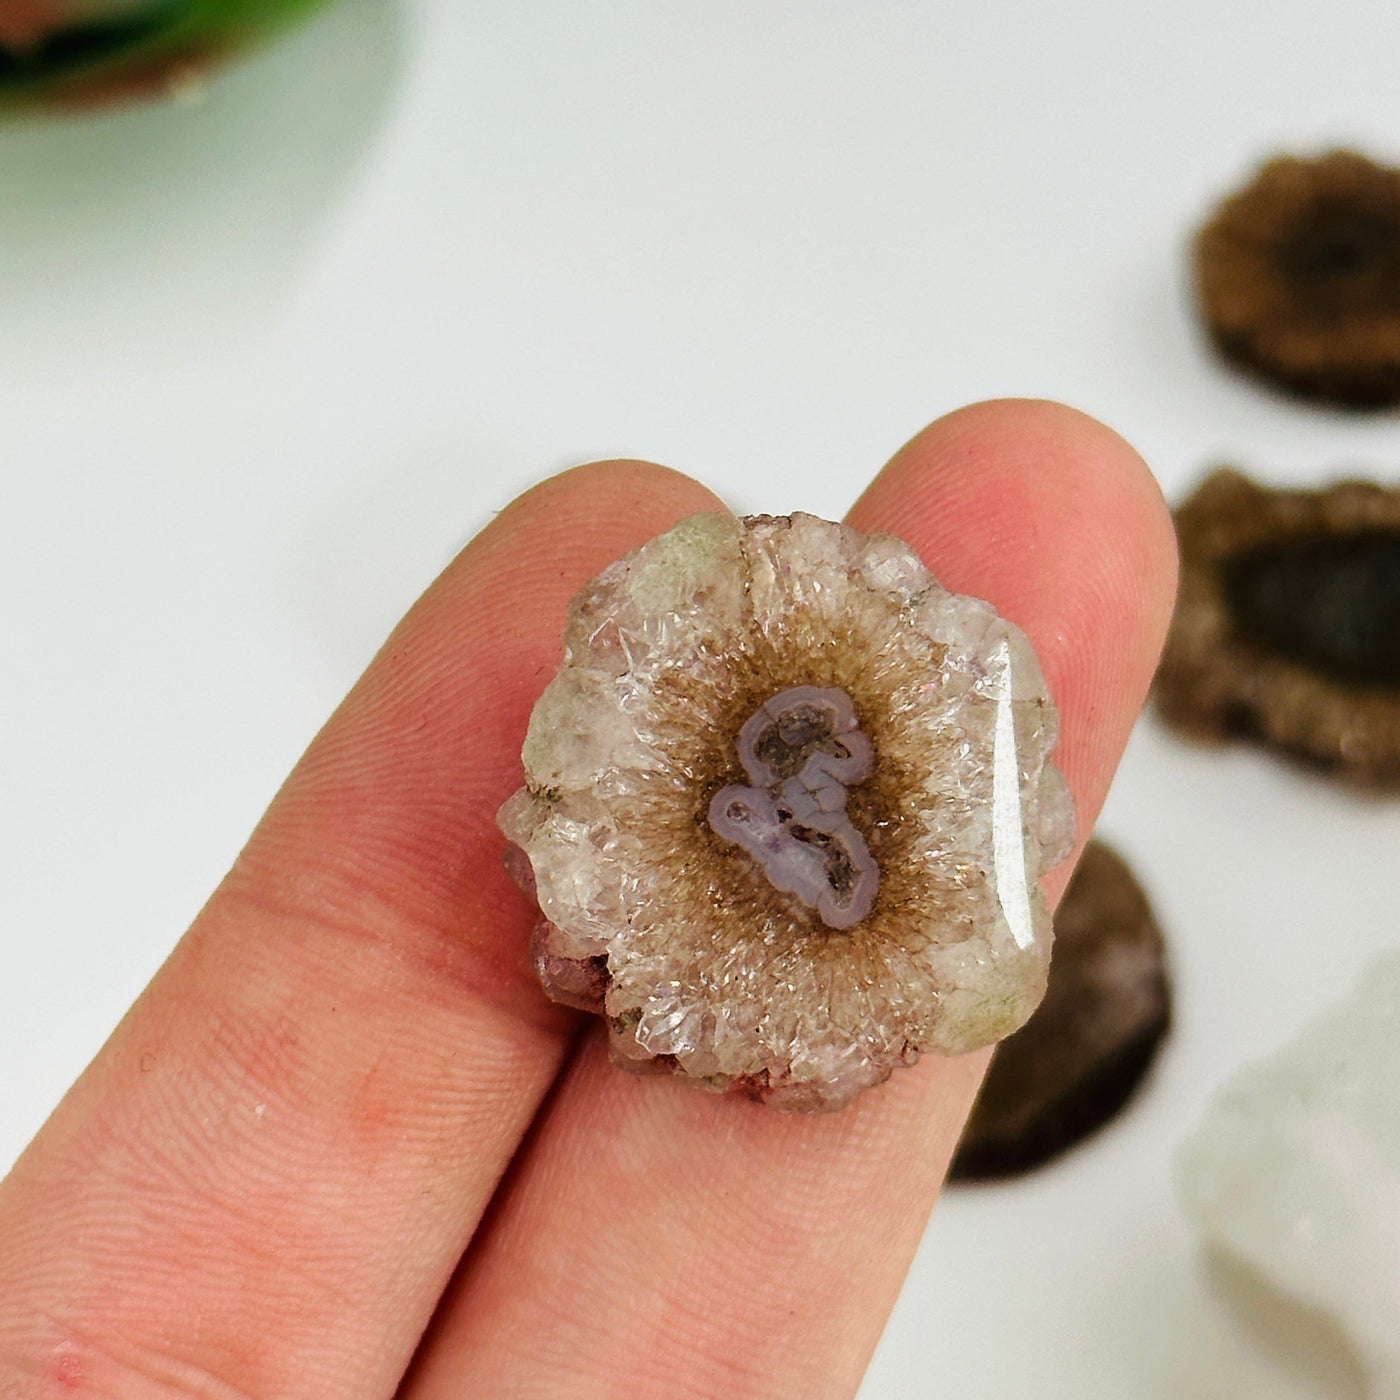 2 fingers holding up amethyst stalactite slice for size reference